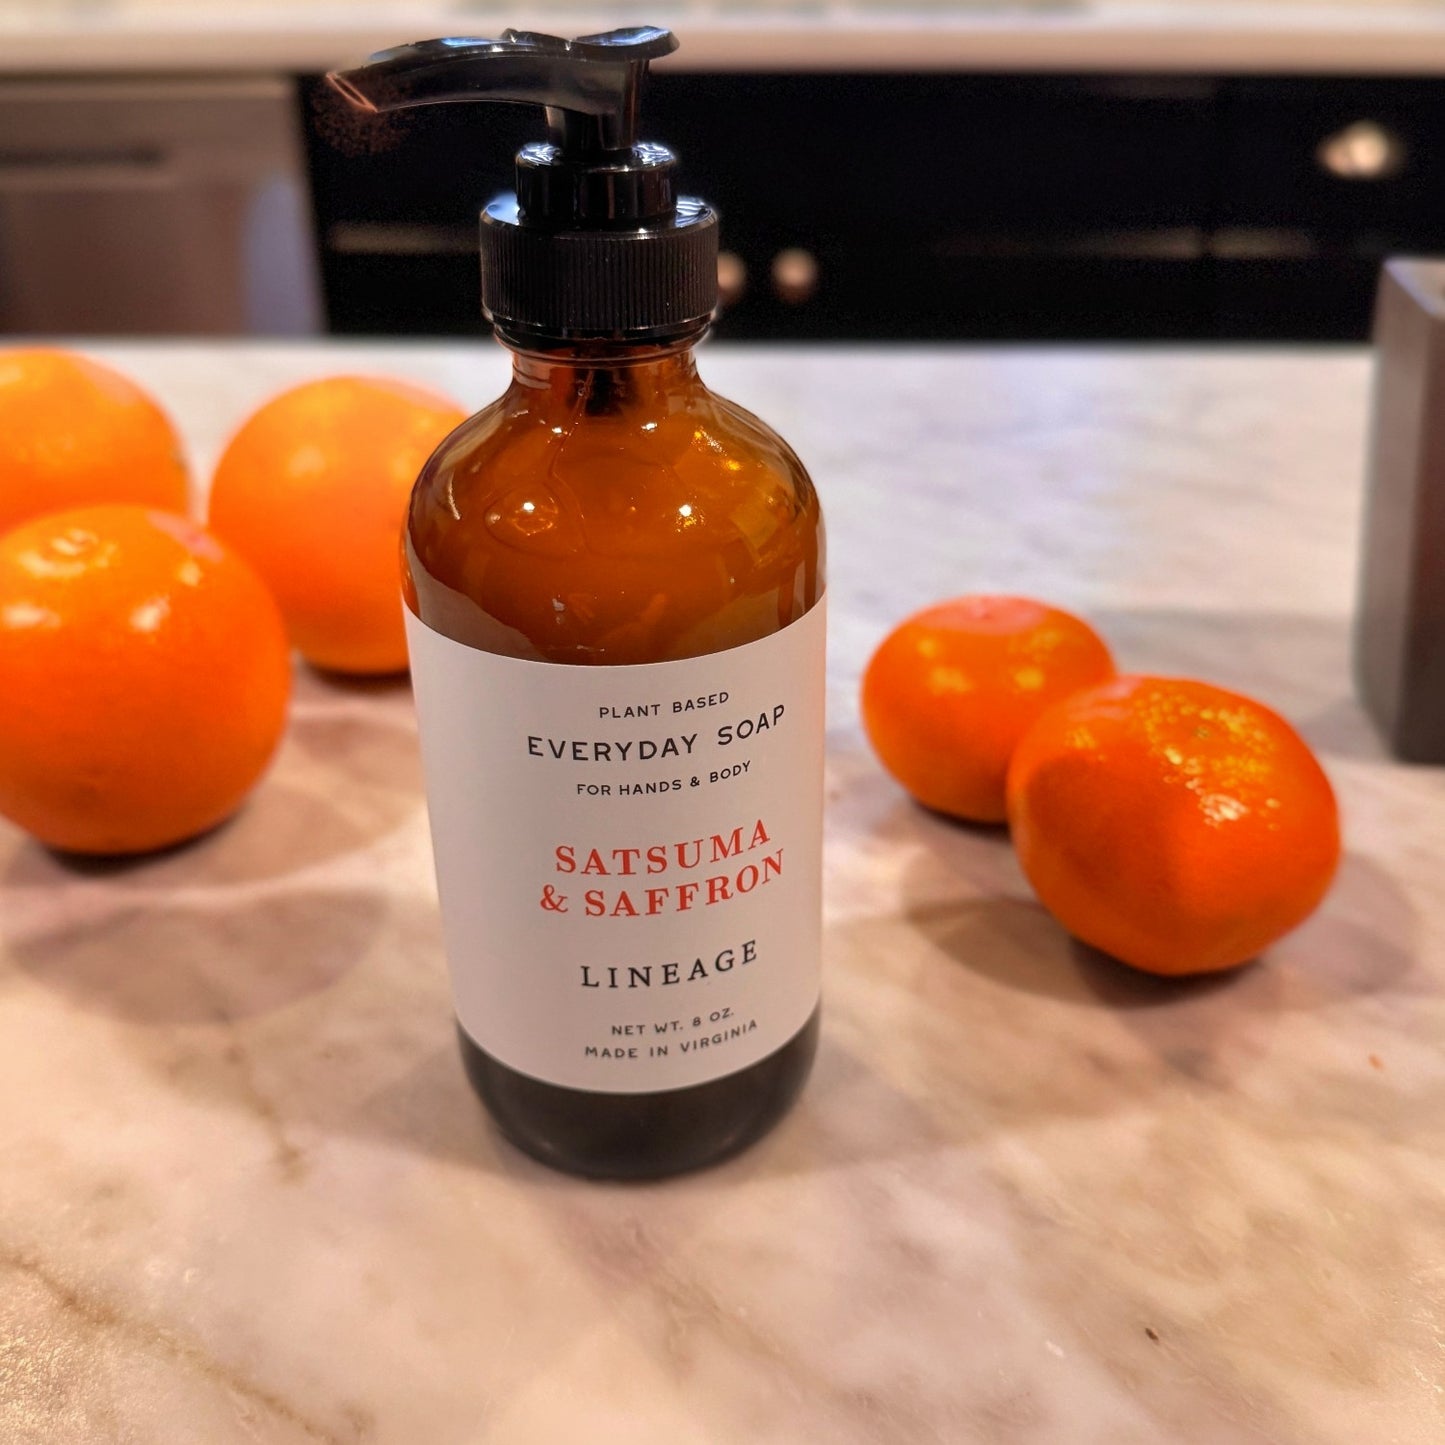 Bottle of Satsuma & Saffron liquid soap on counter with oranges and tangerines